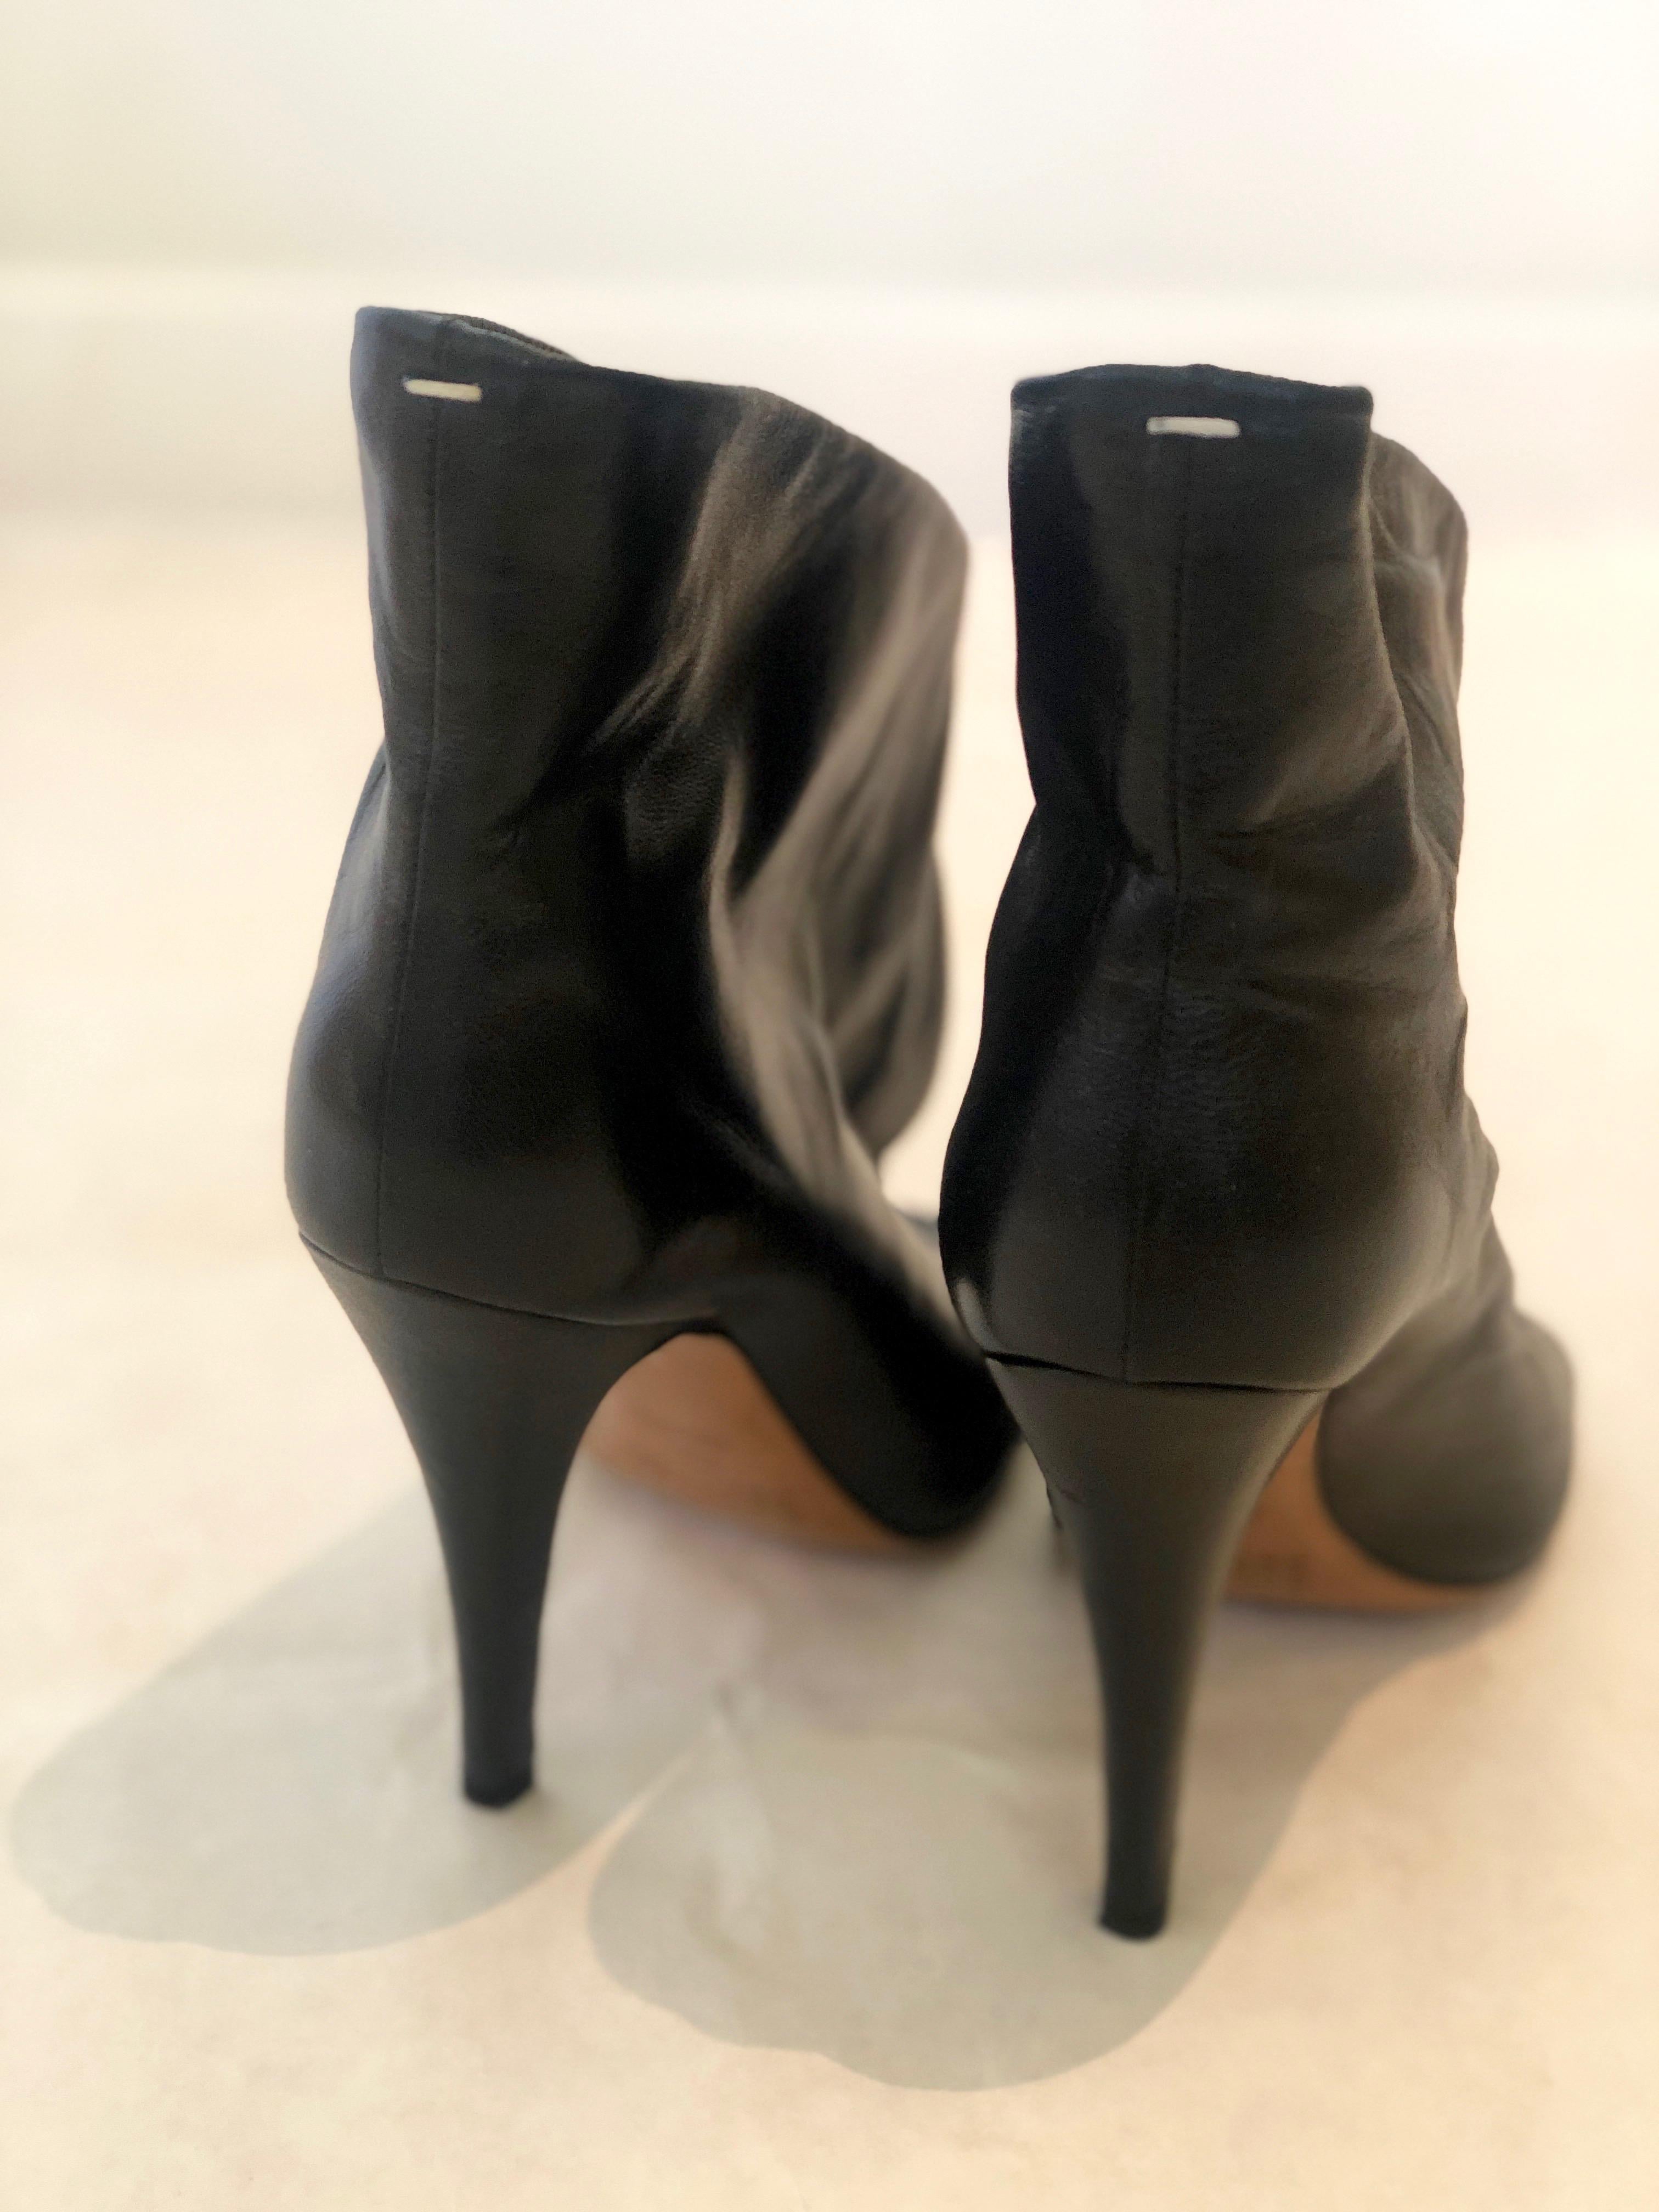 Pair of Maison Martin Margiala Black Open Toe Ankle Boots w/ Wide Unfitted Top  For Sale 3